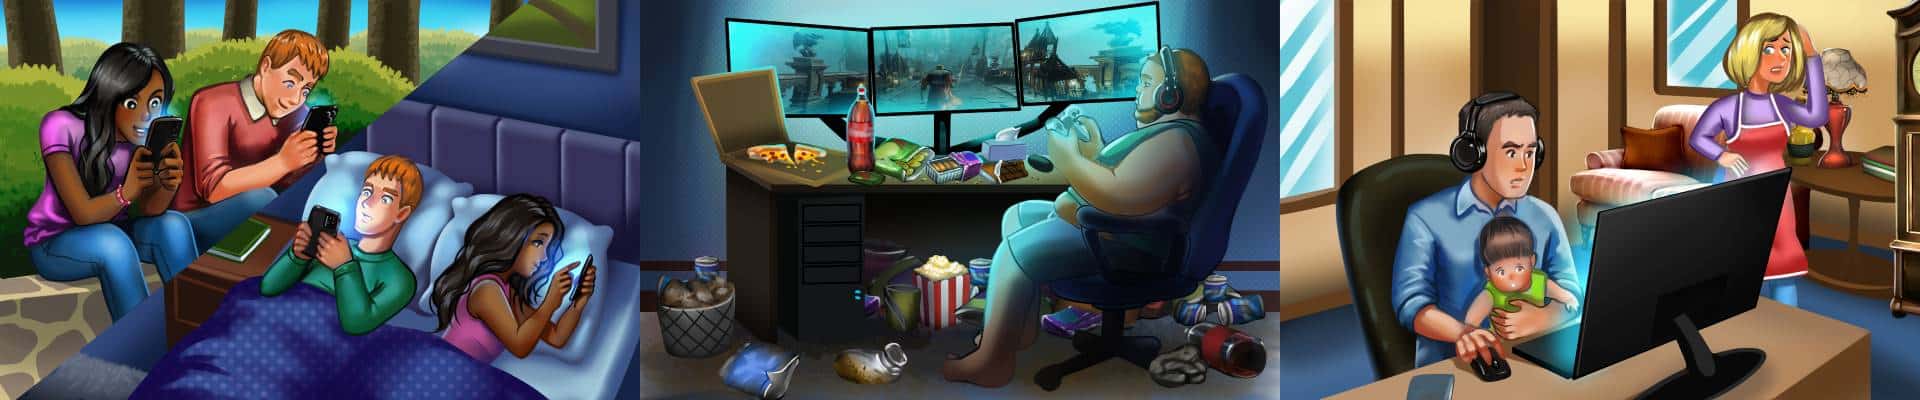 Gameaholic: How I Gained Control of My Game Addiction